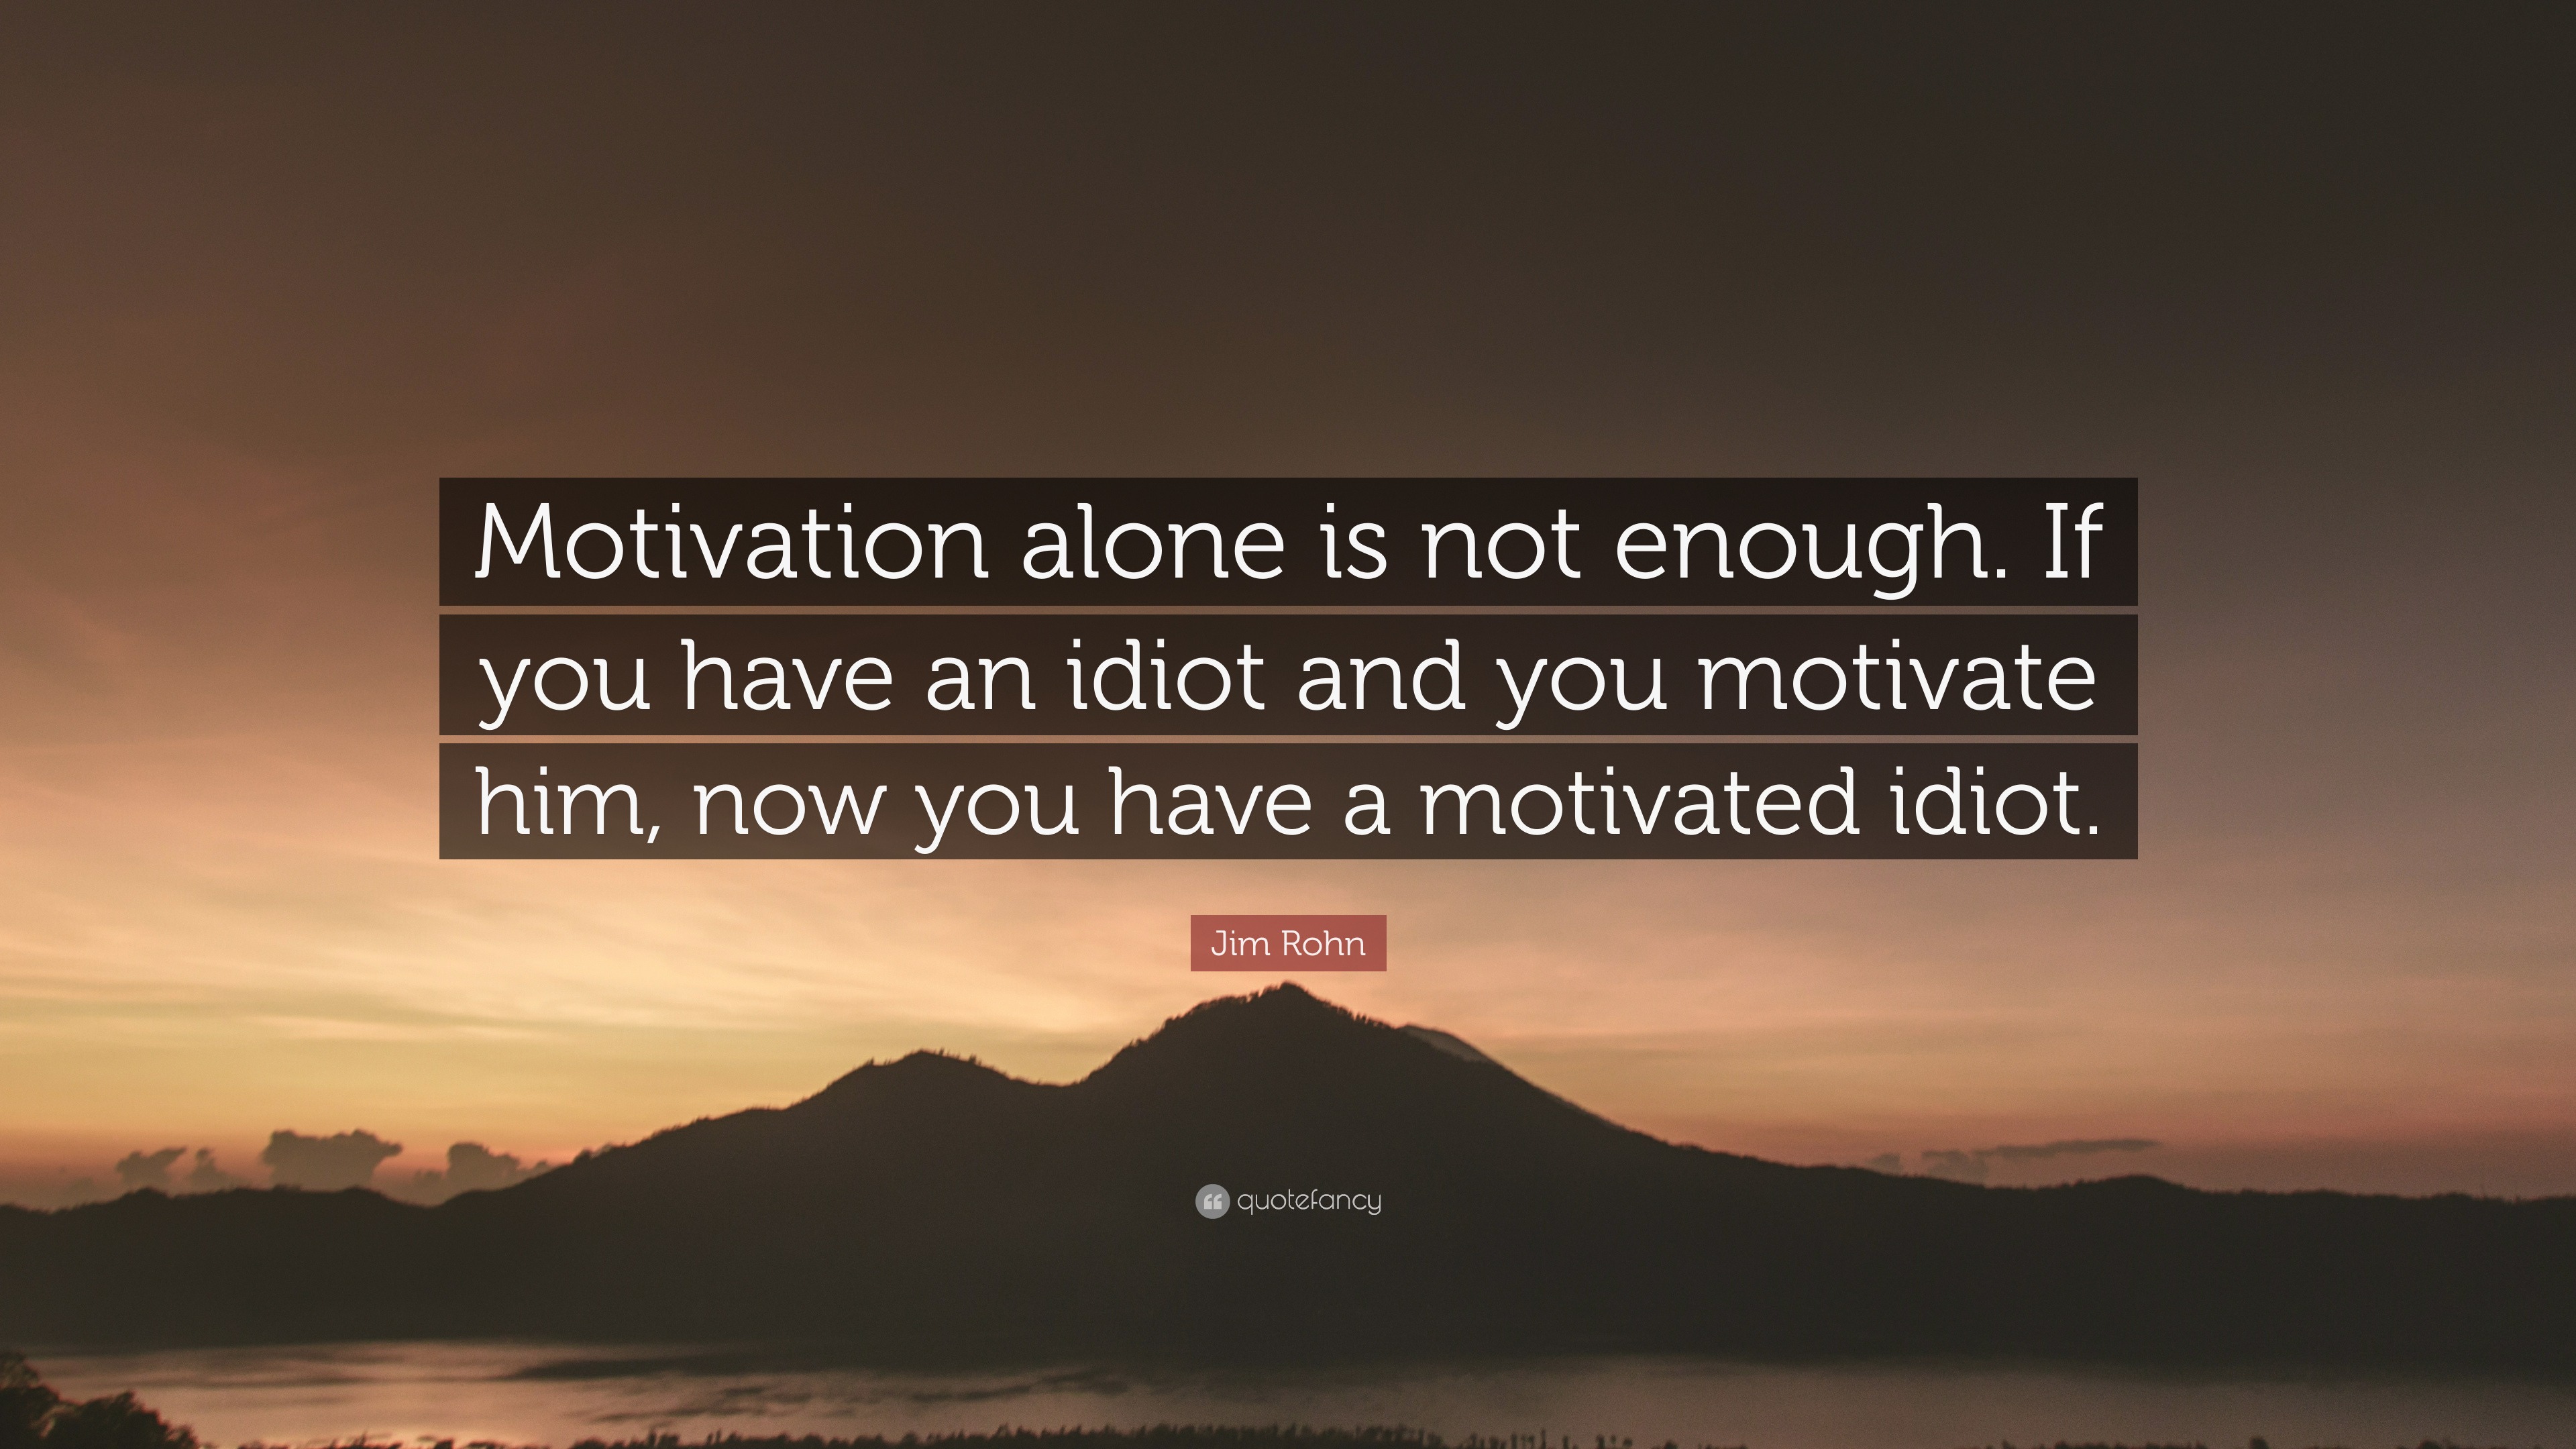 Jim Rohn Quote: “Motivation alone is not enough. If you have an idiot